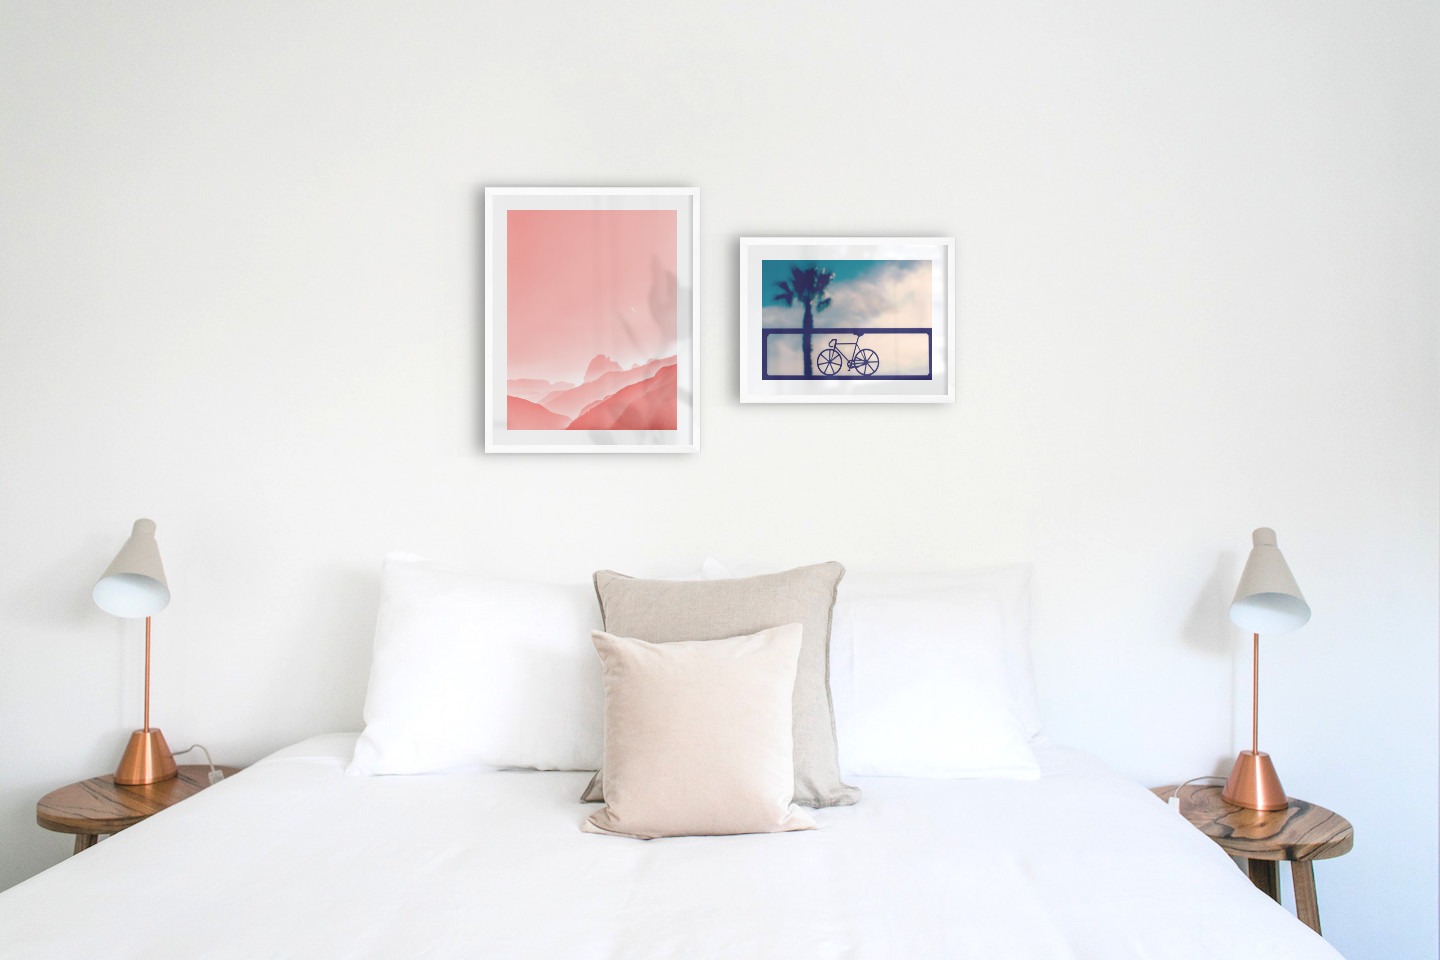 Gallery wall with picture frames in white in sizes 40x50 and 30x40 with prints "Pink sky" and "Bicycle in front of sky"